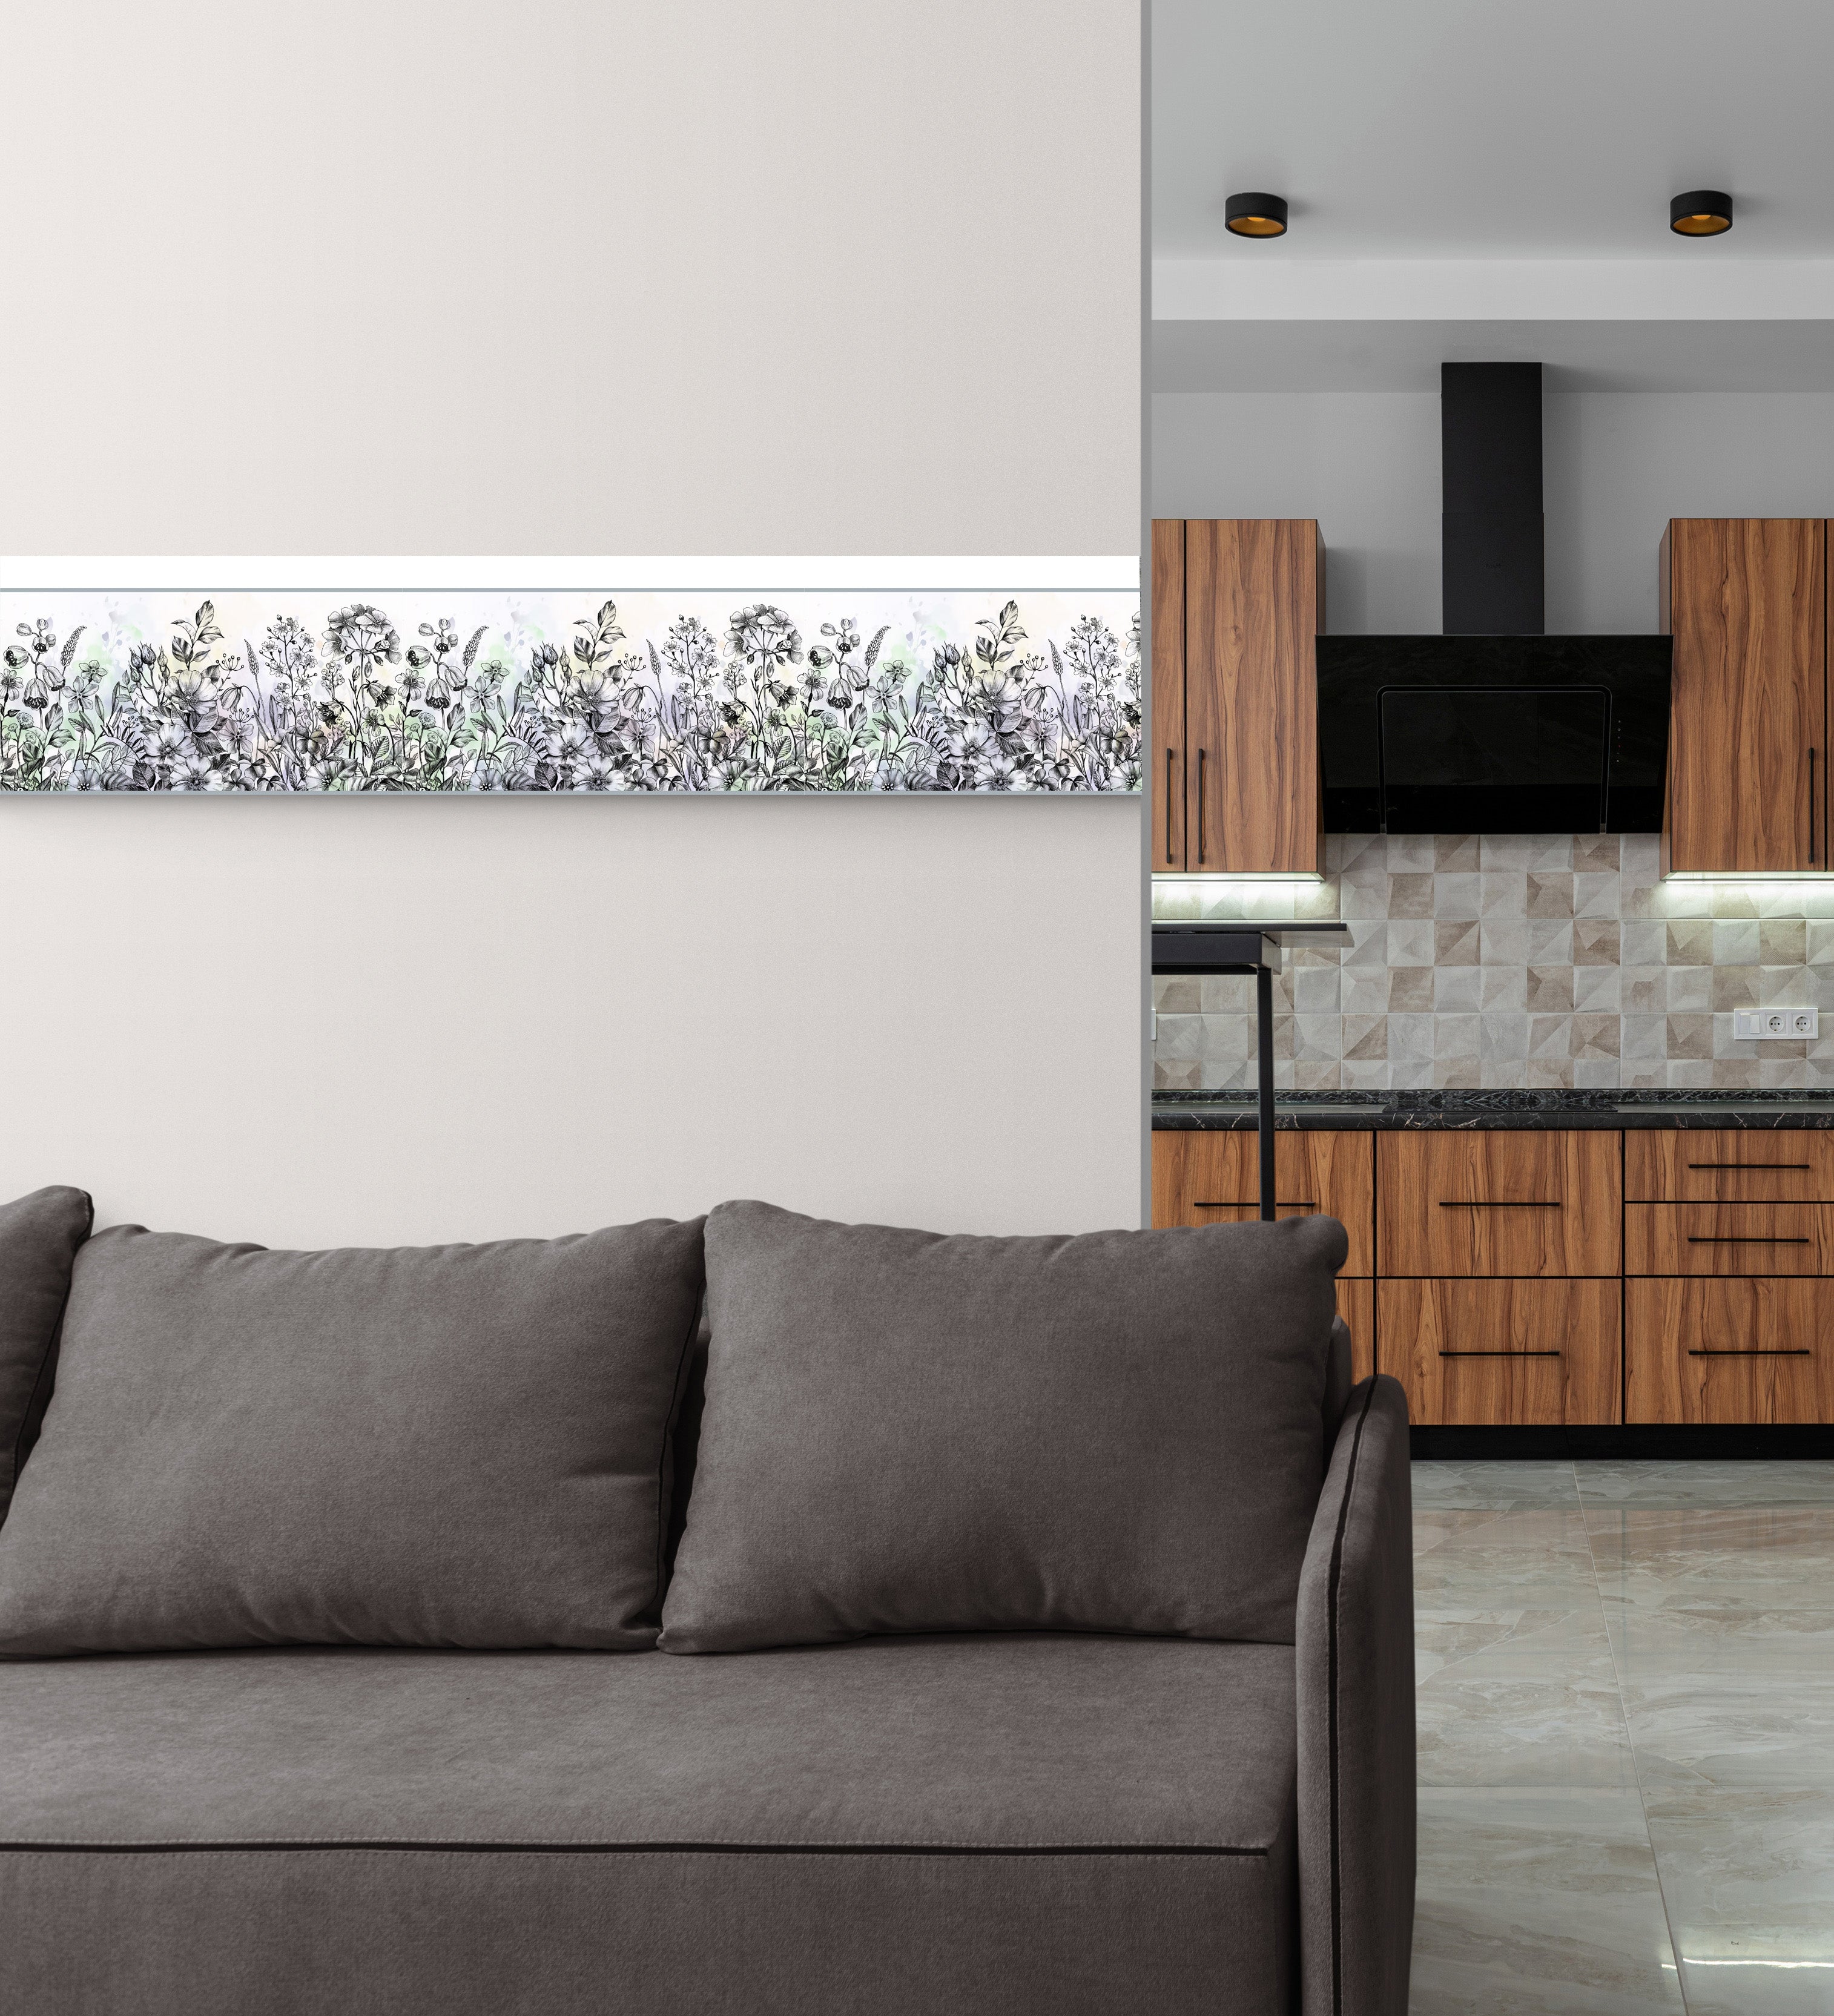 GB5001 Etched Blossom Peel and Stick Wallpaper Border 10in or 8in Height x 15ft Long Gray Teal Blue